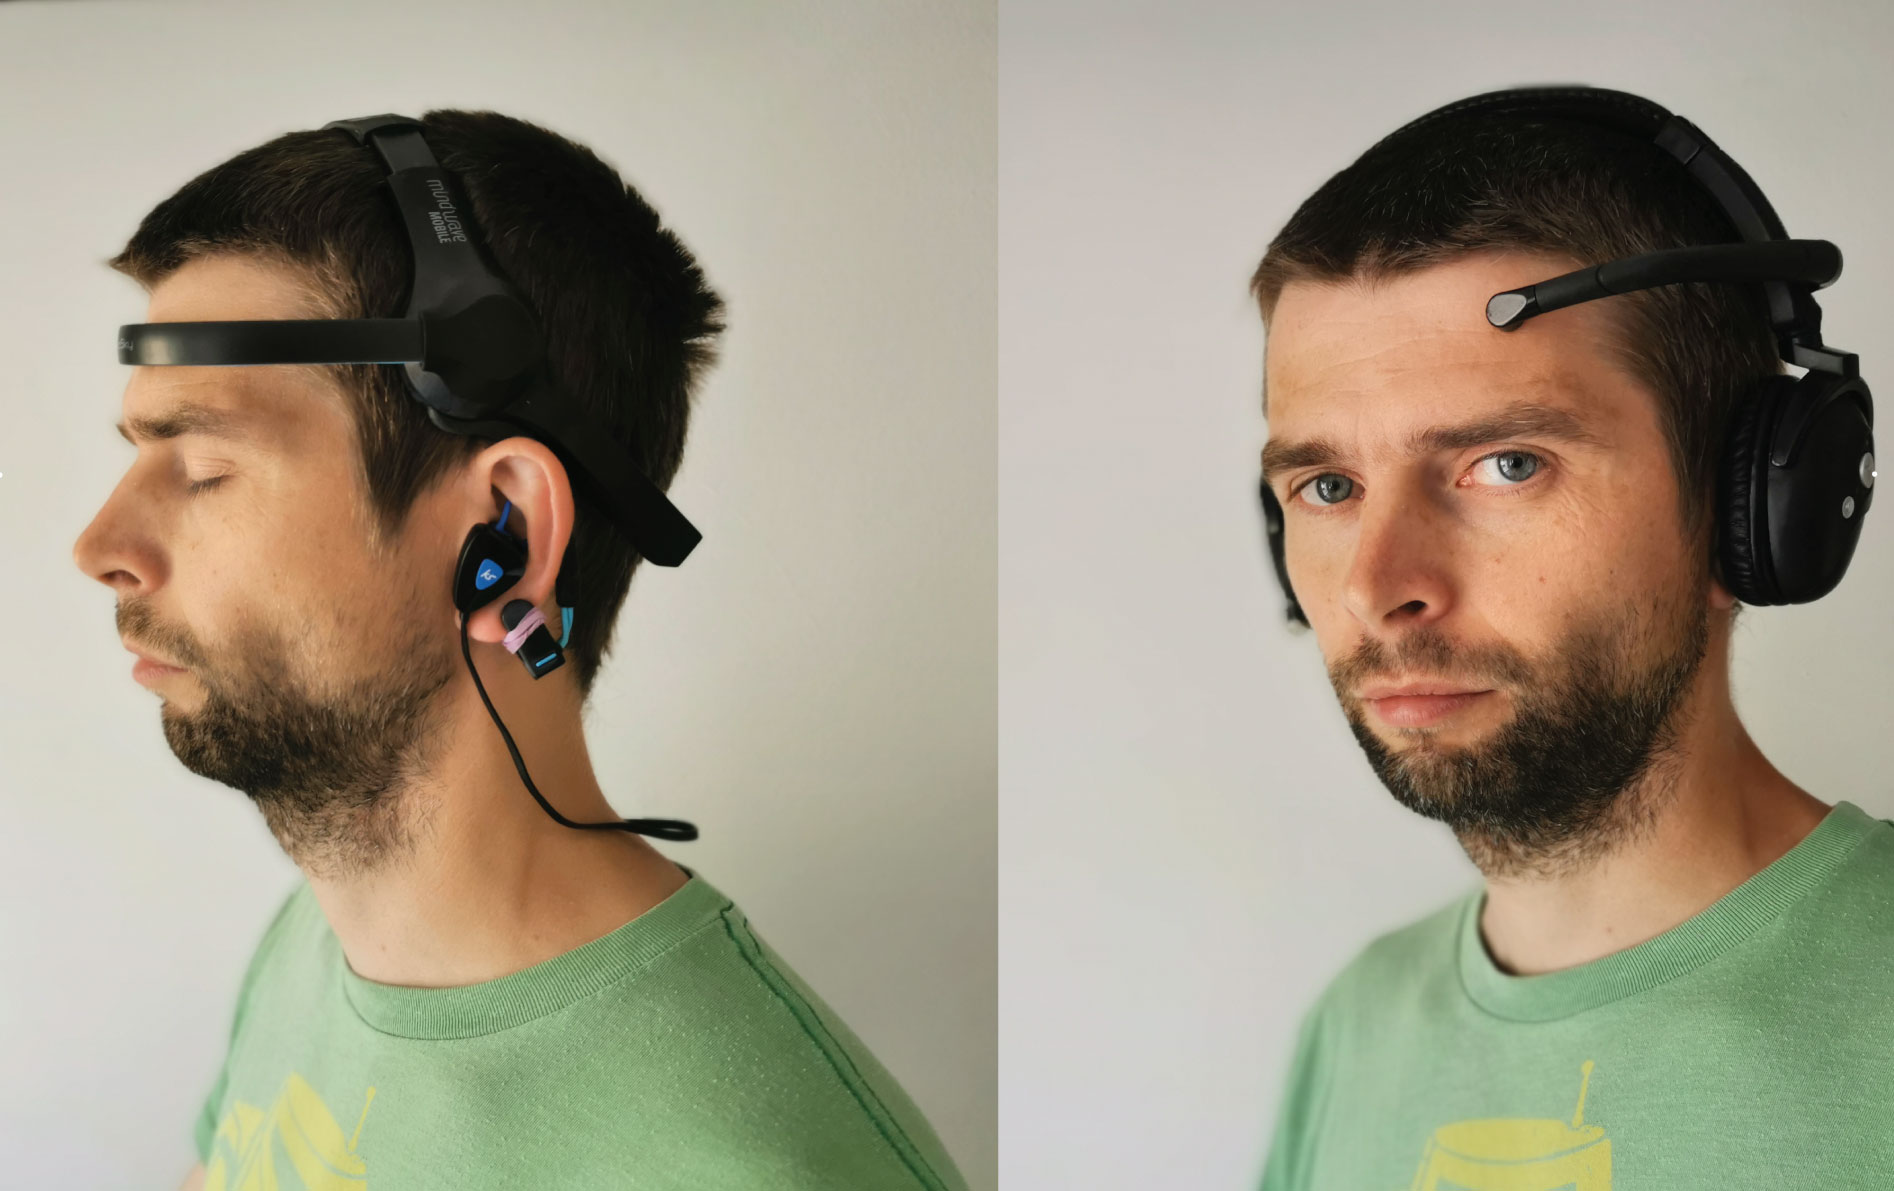 Photo of NeuroSky headsets: Mindwave (left) with additional Bluetooth headphones and Mindset (left) with built-in over-ear headphones.